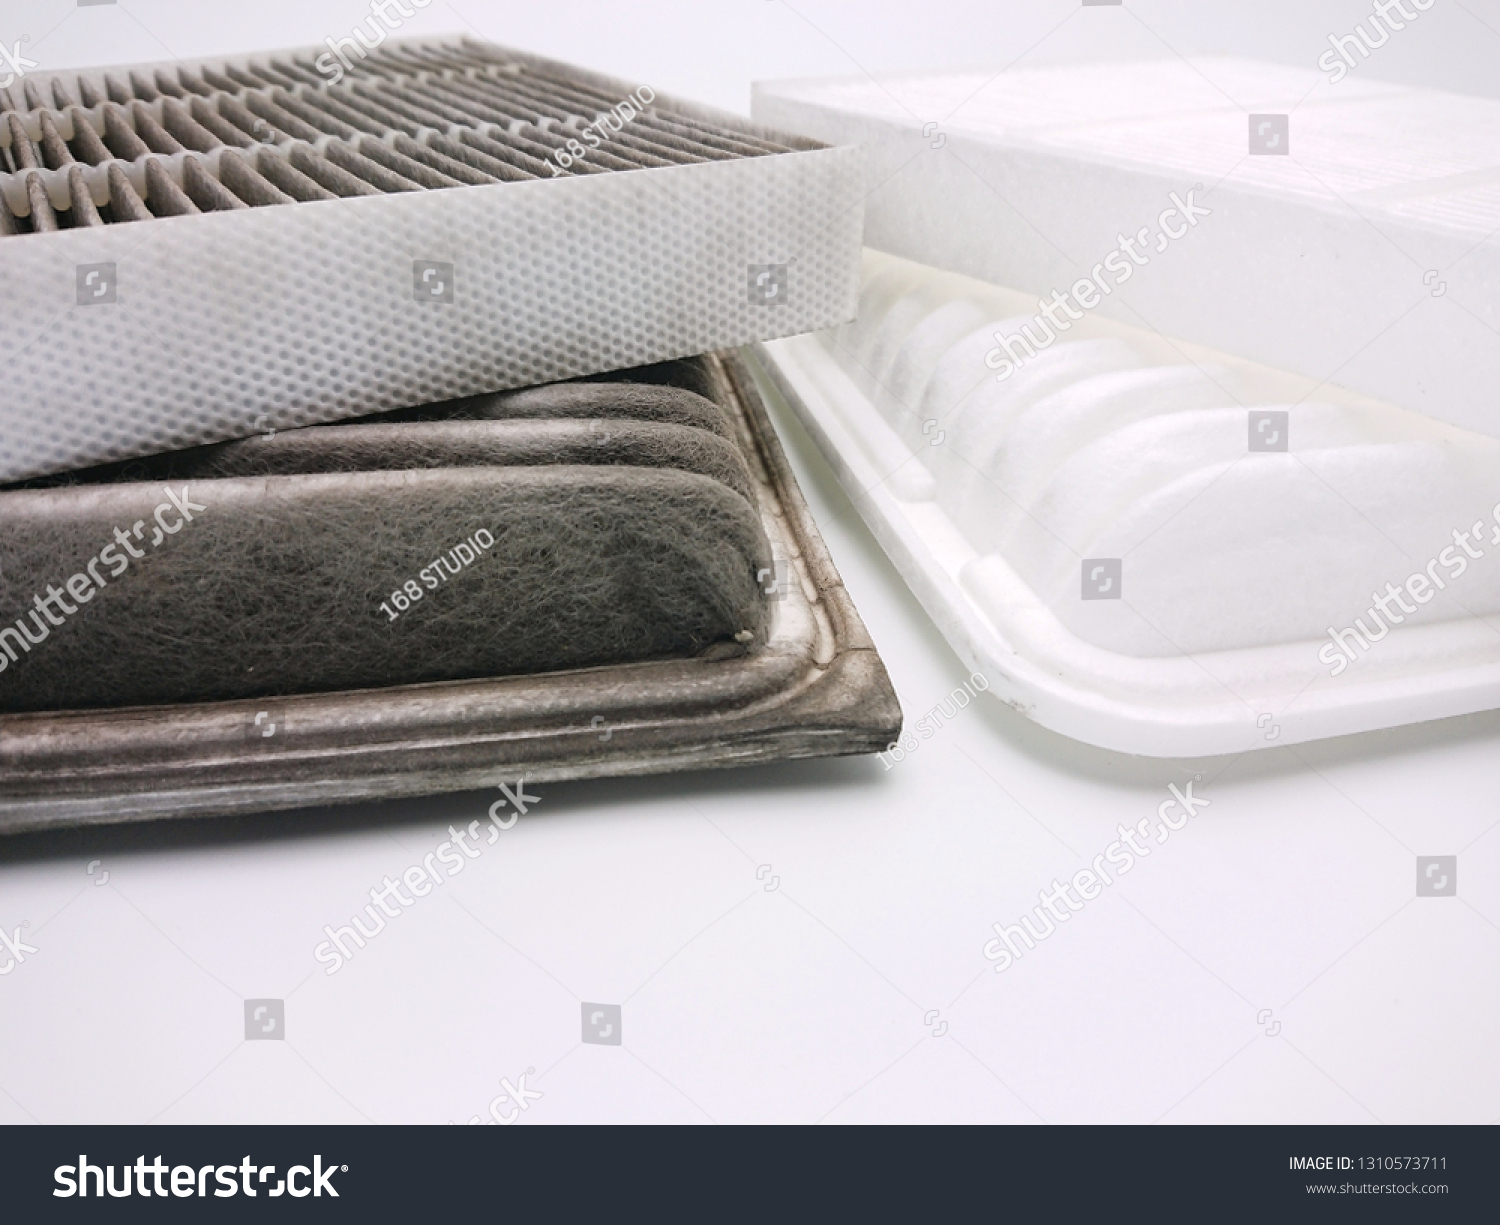 Dirty and new automotive cabin, engine air filter isolated on white background #1310573711